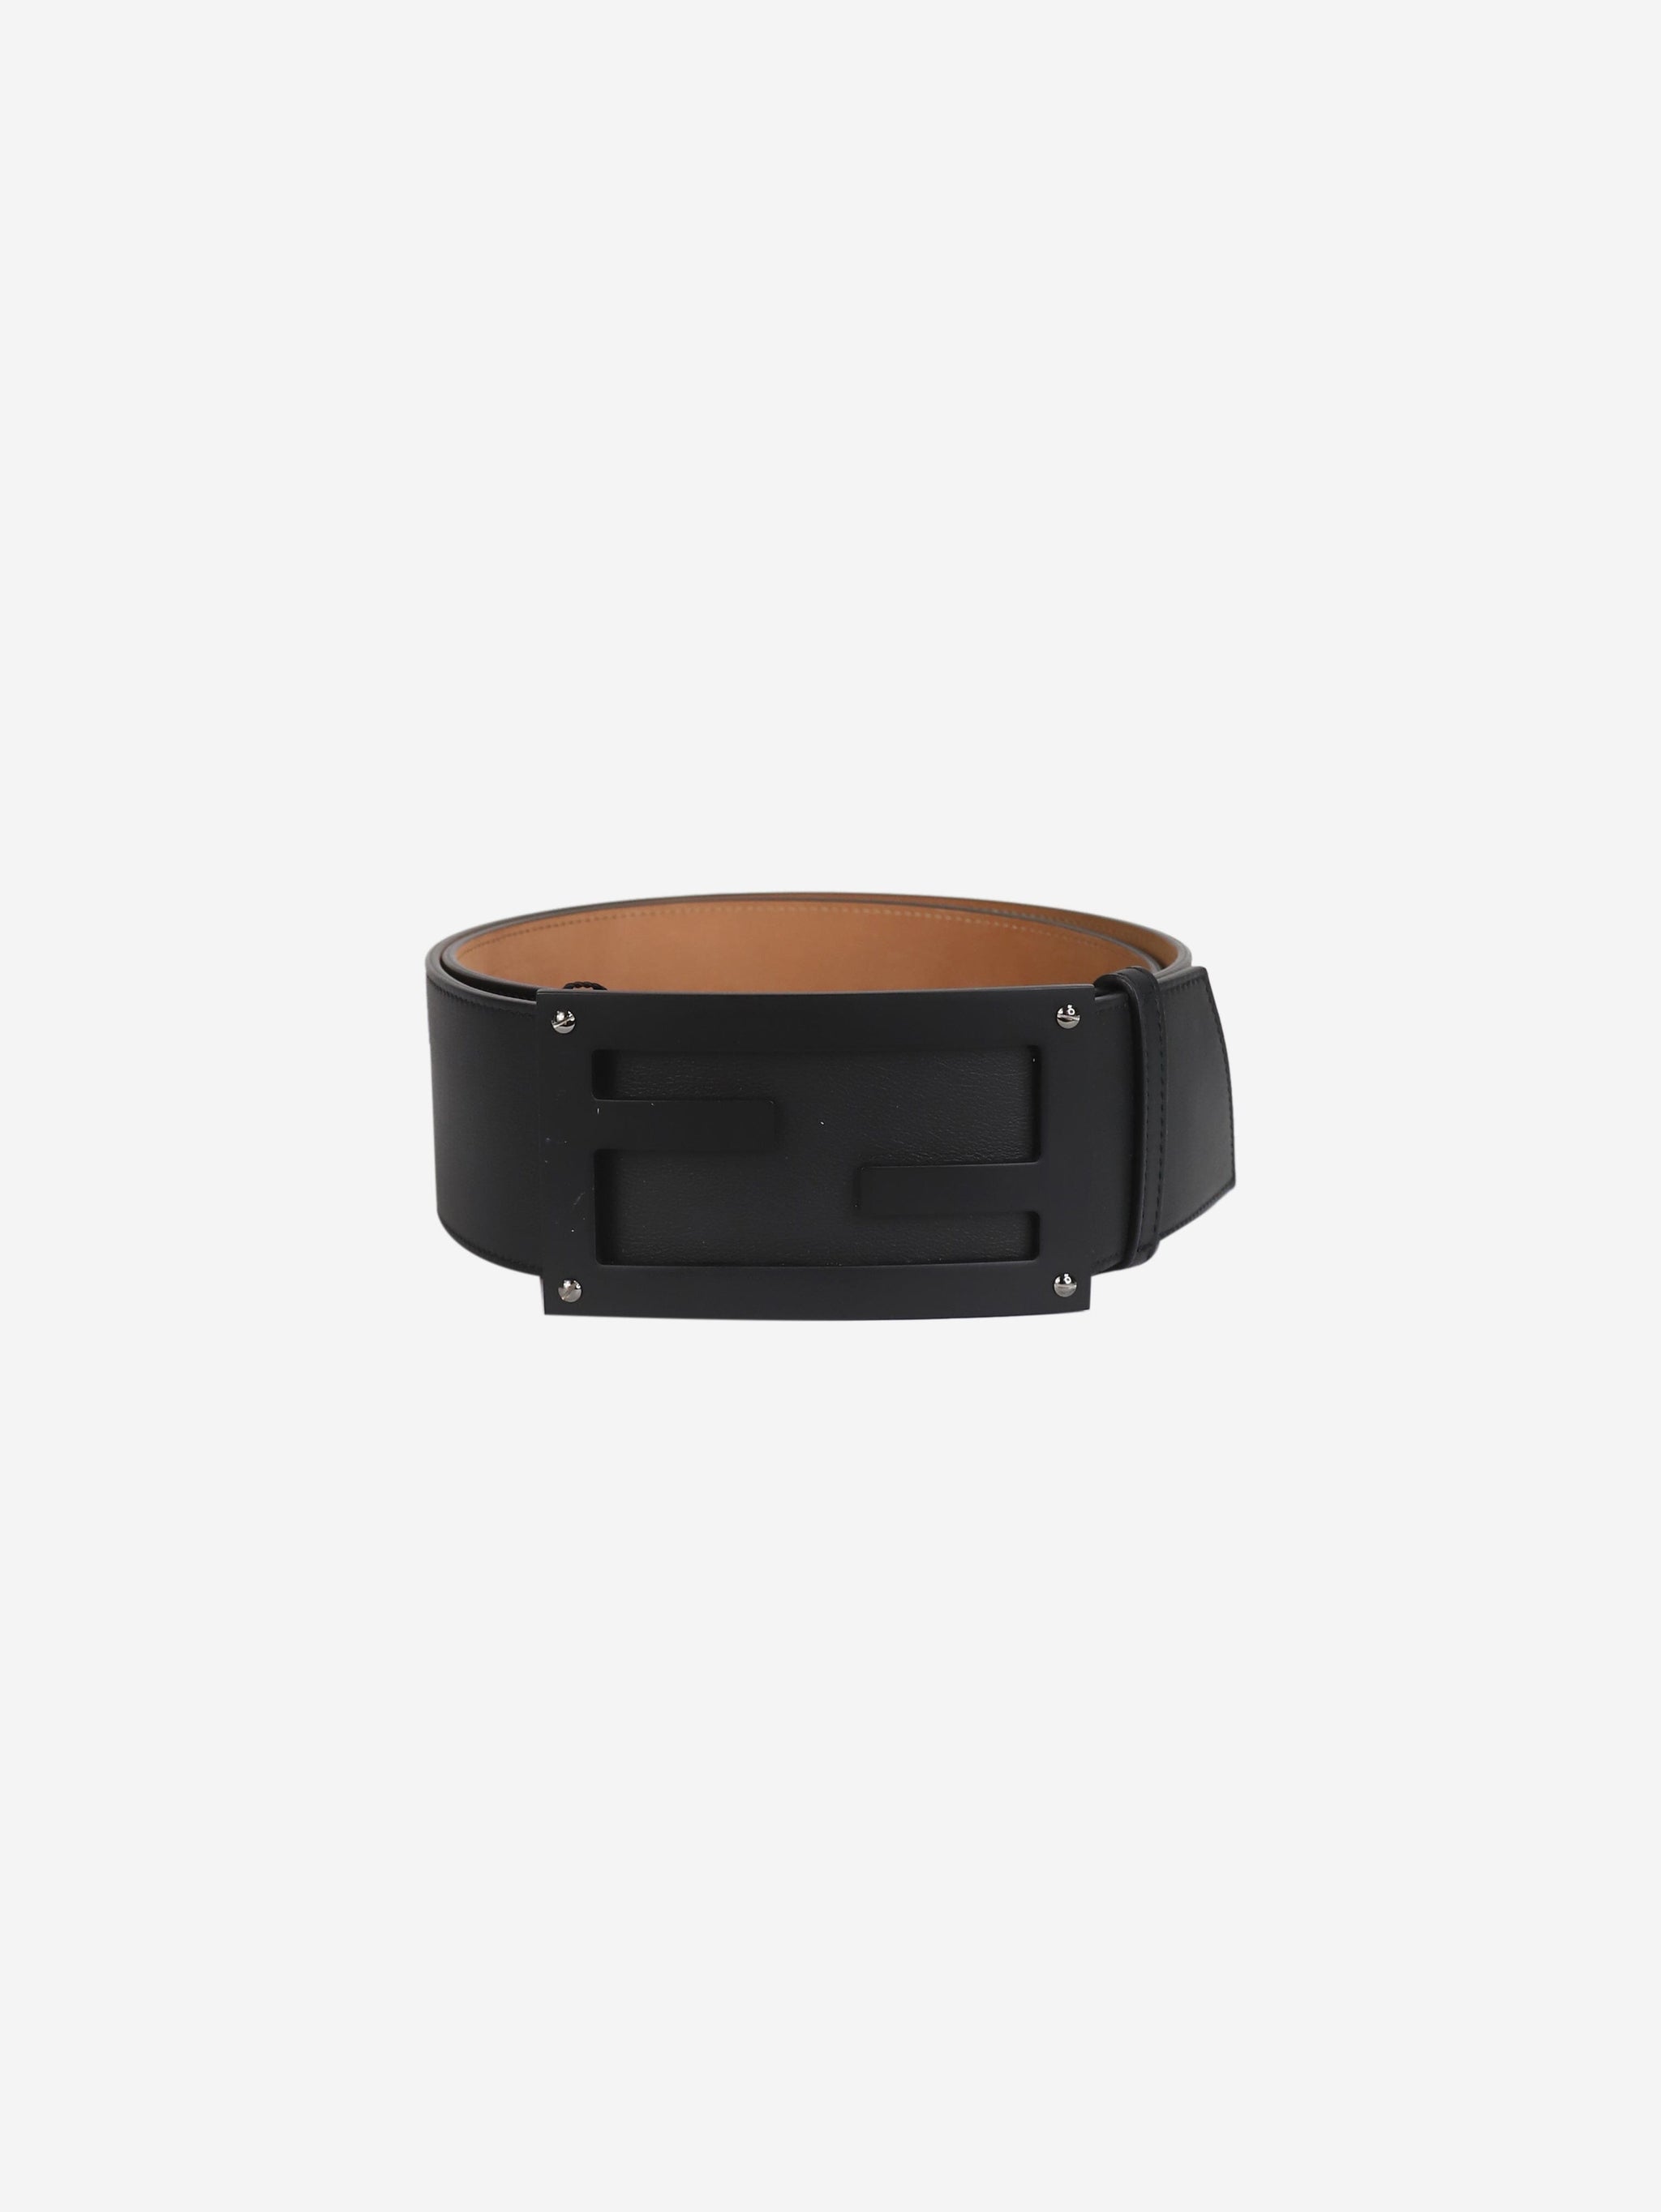 Fendi pre-owned black leather belt | Sign of the Times